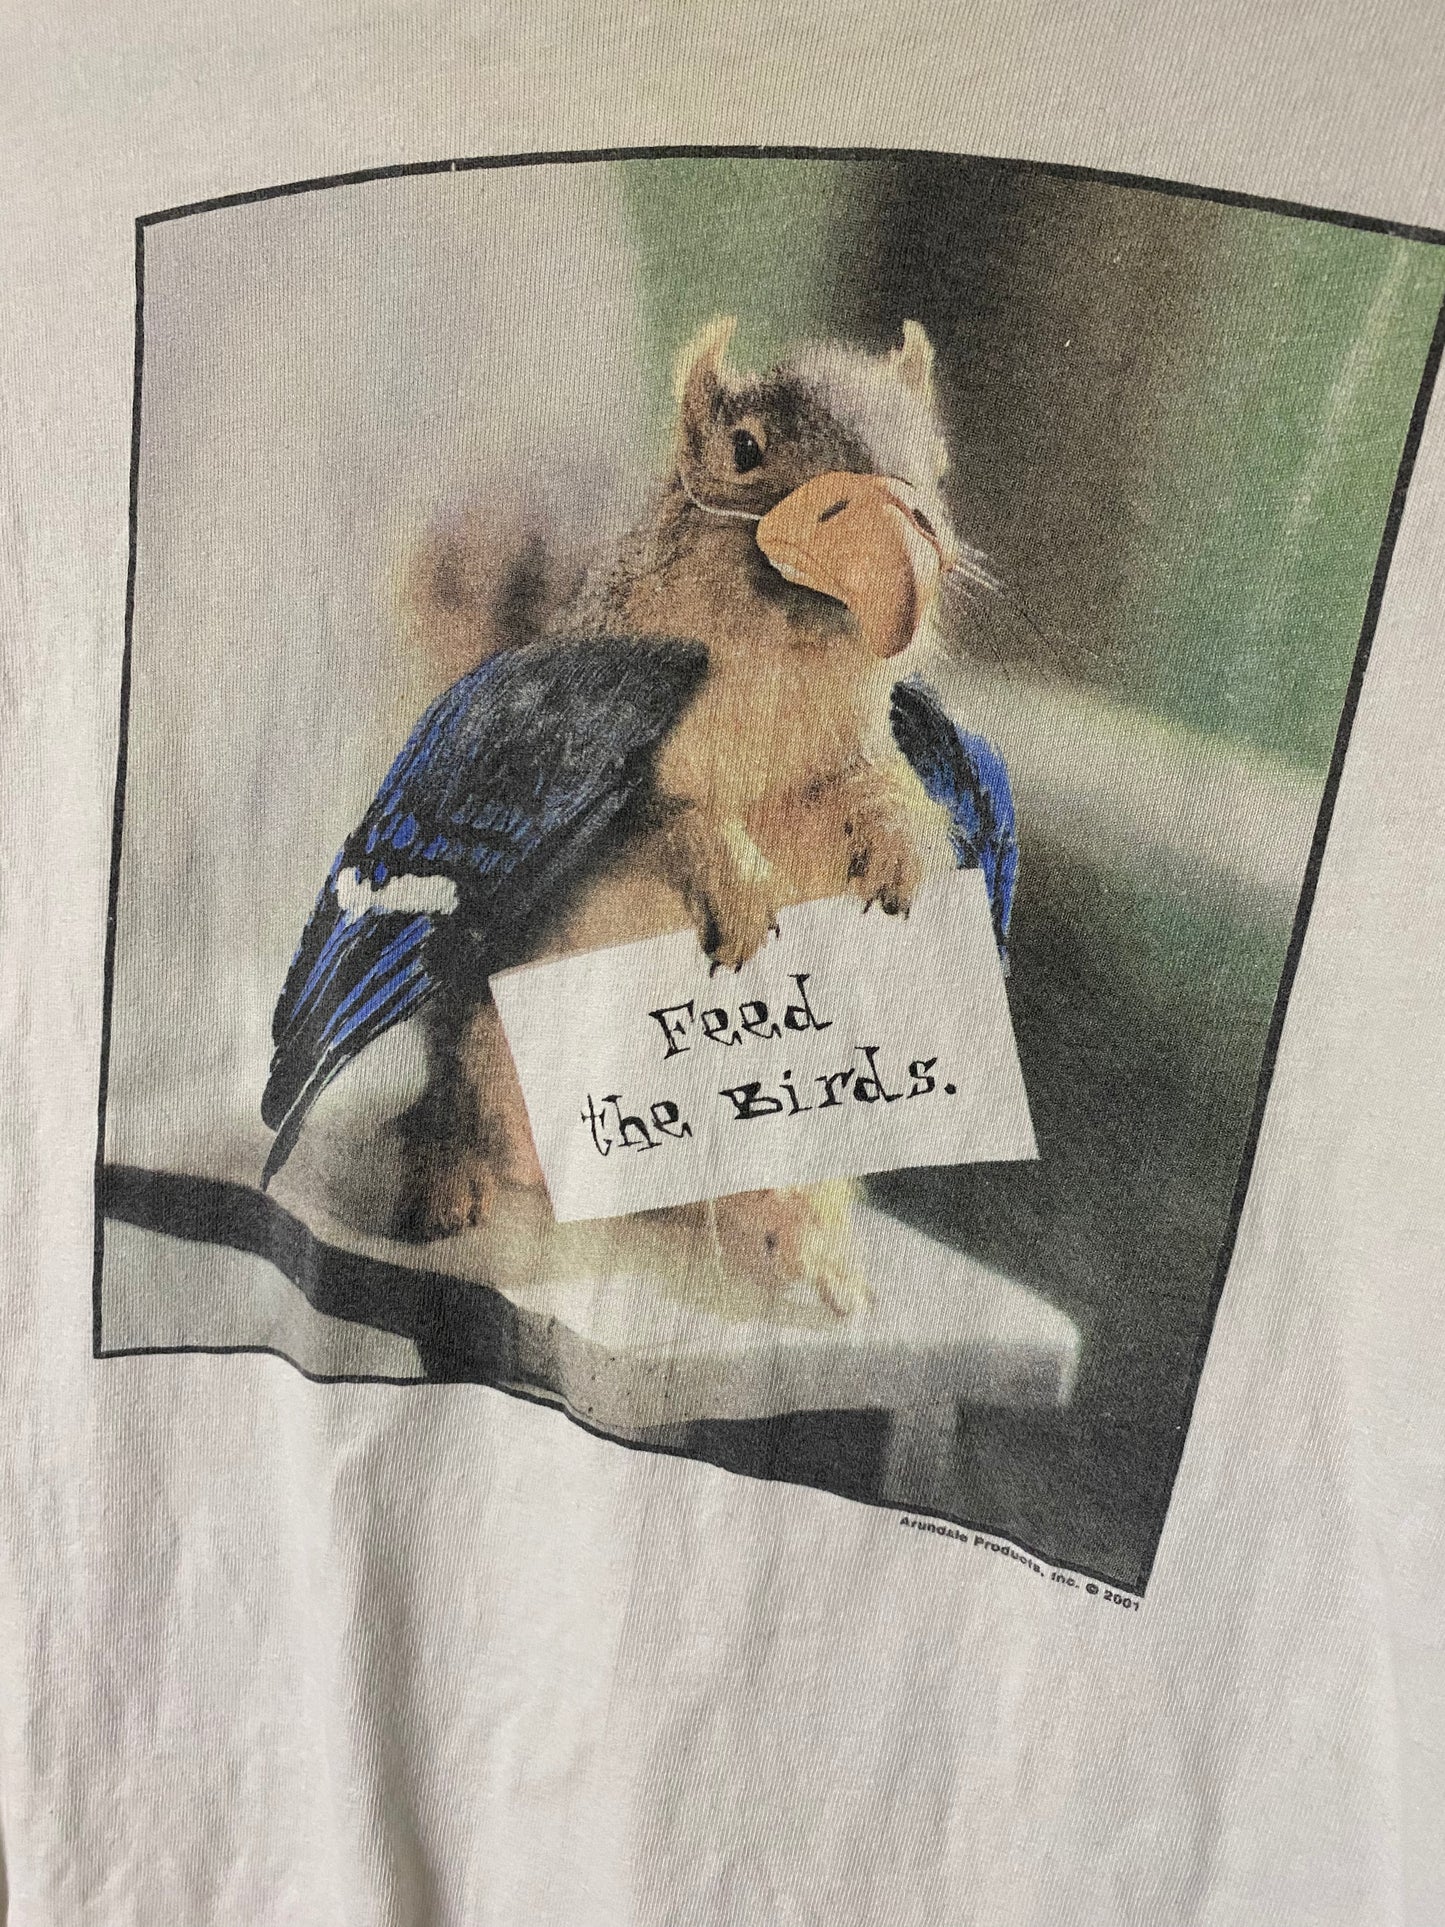 00's Feed the Birds Graphic T Shirt